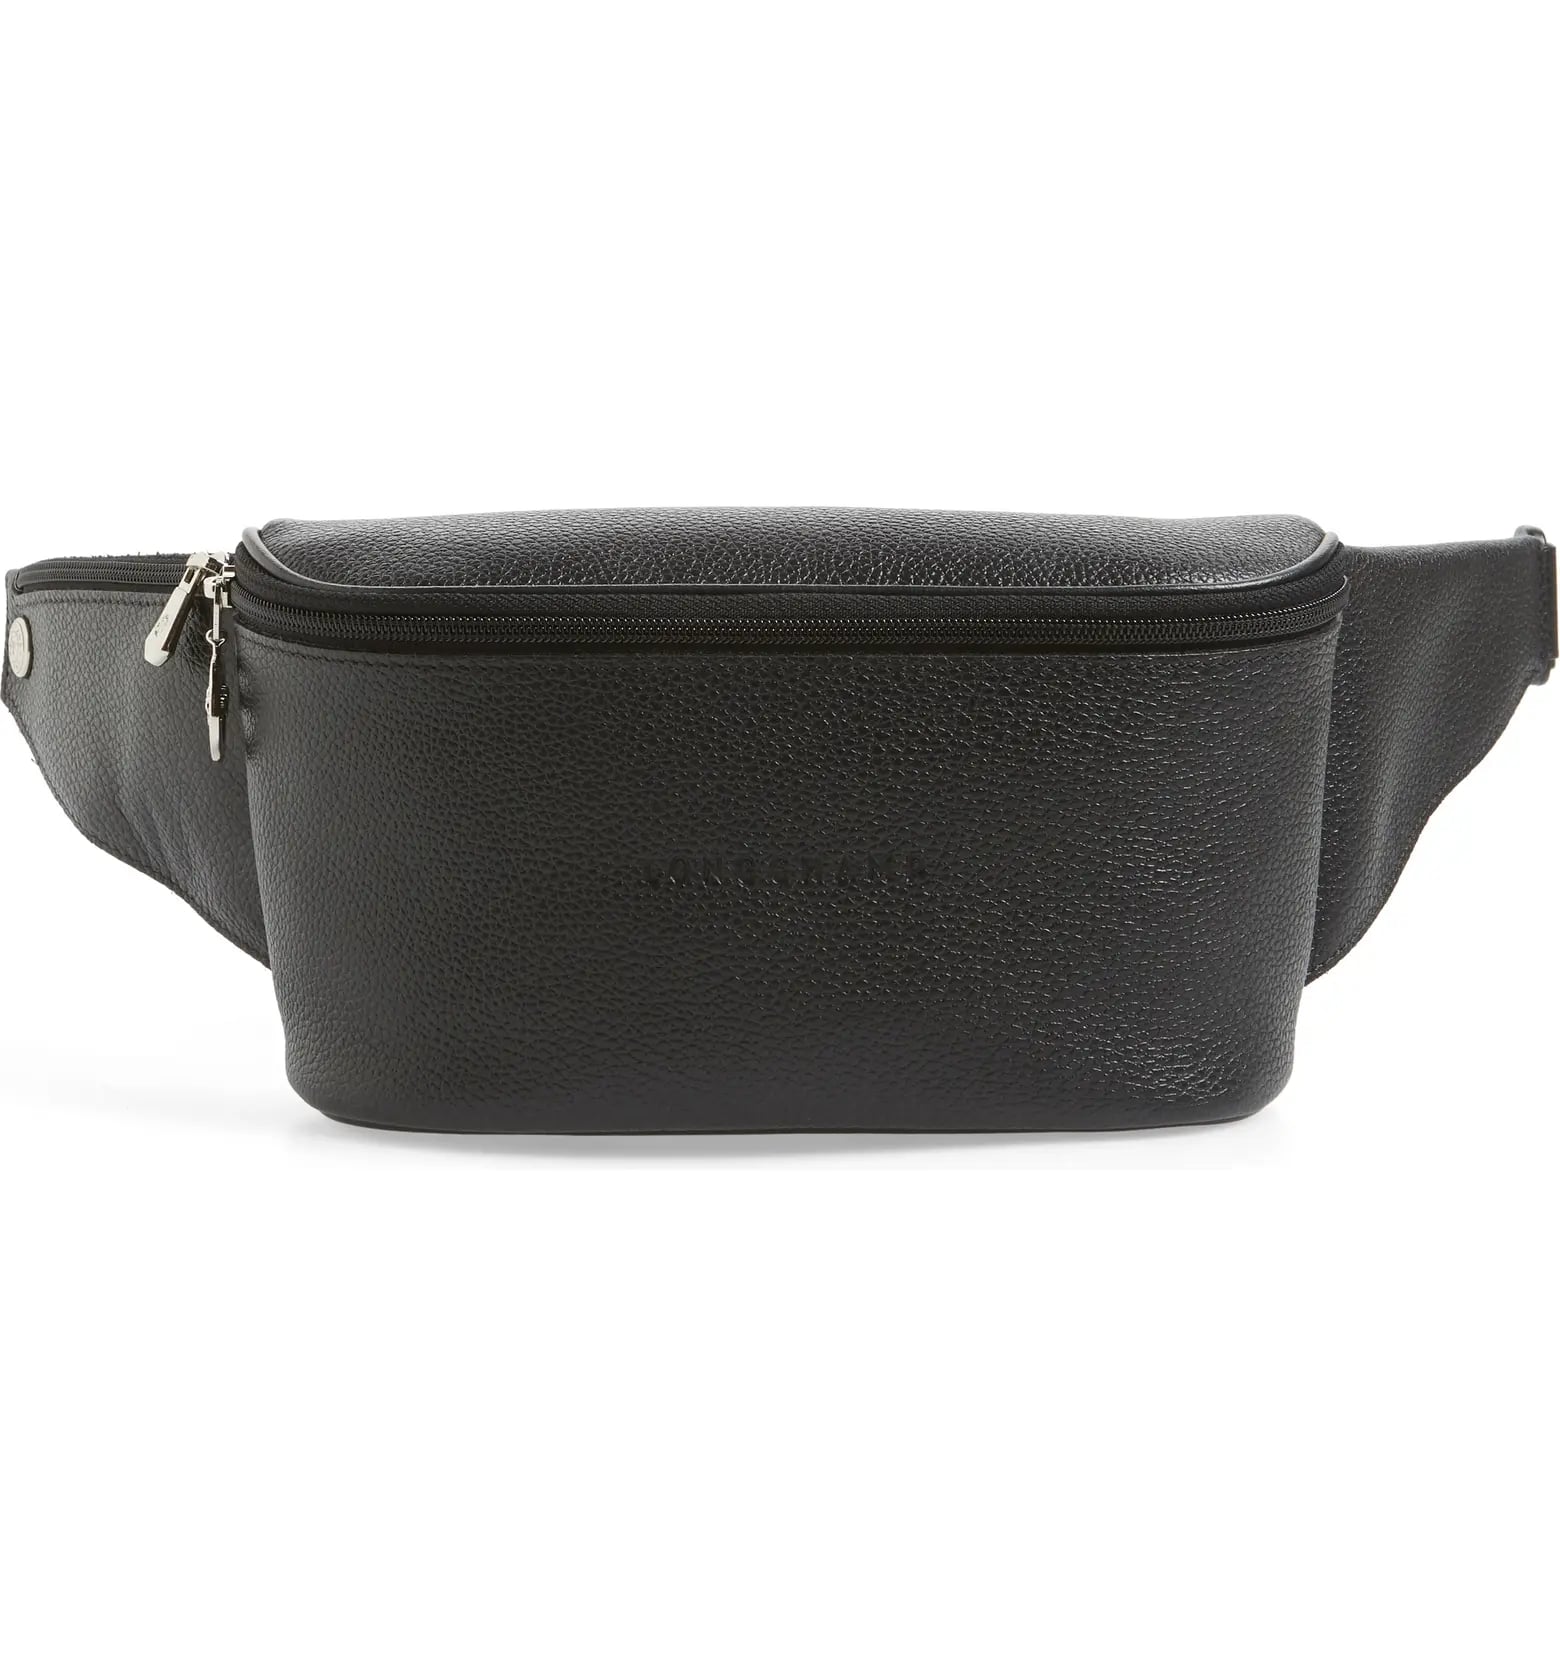 Fanny packs are trending as “waist bags,” with new high-fashion cred